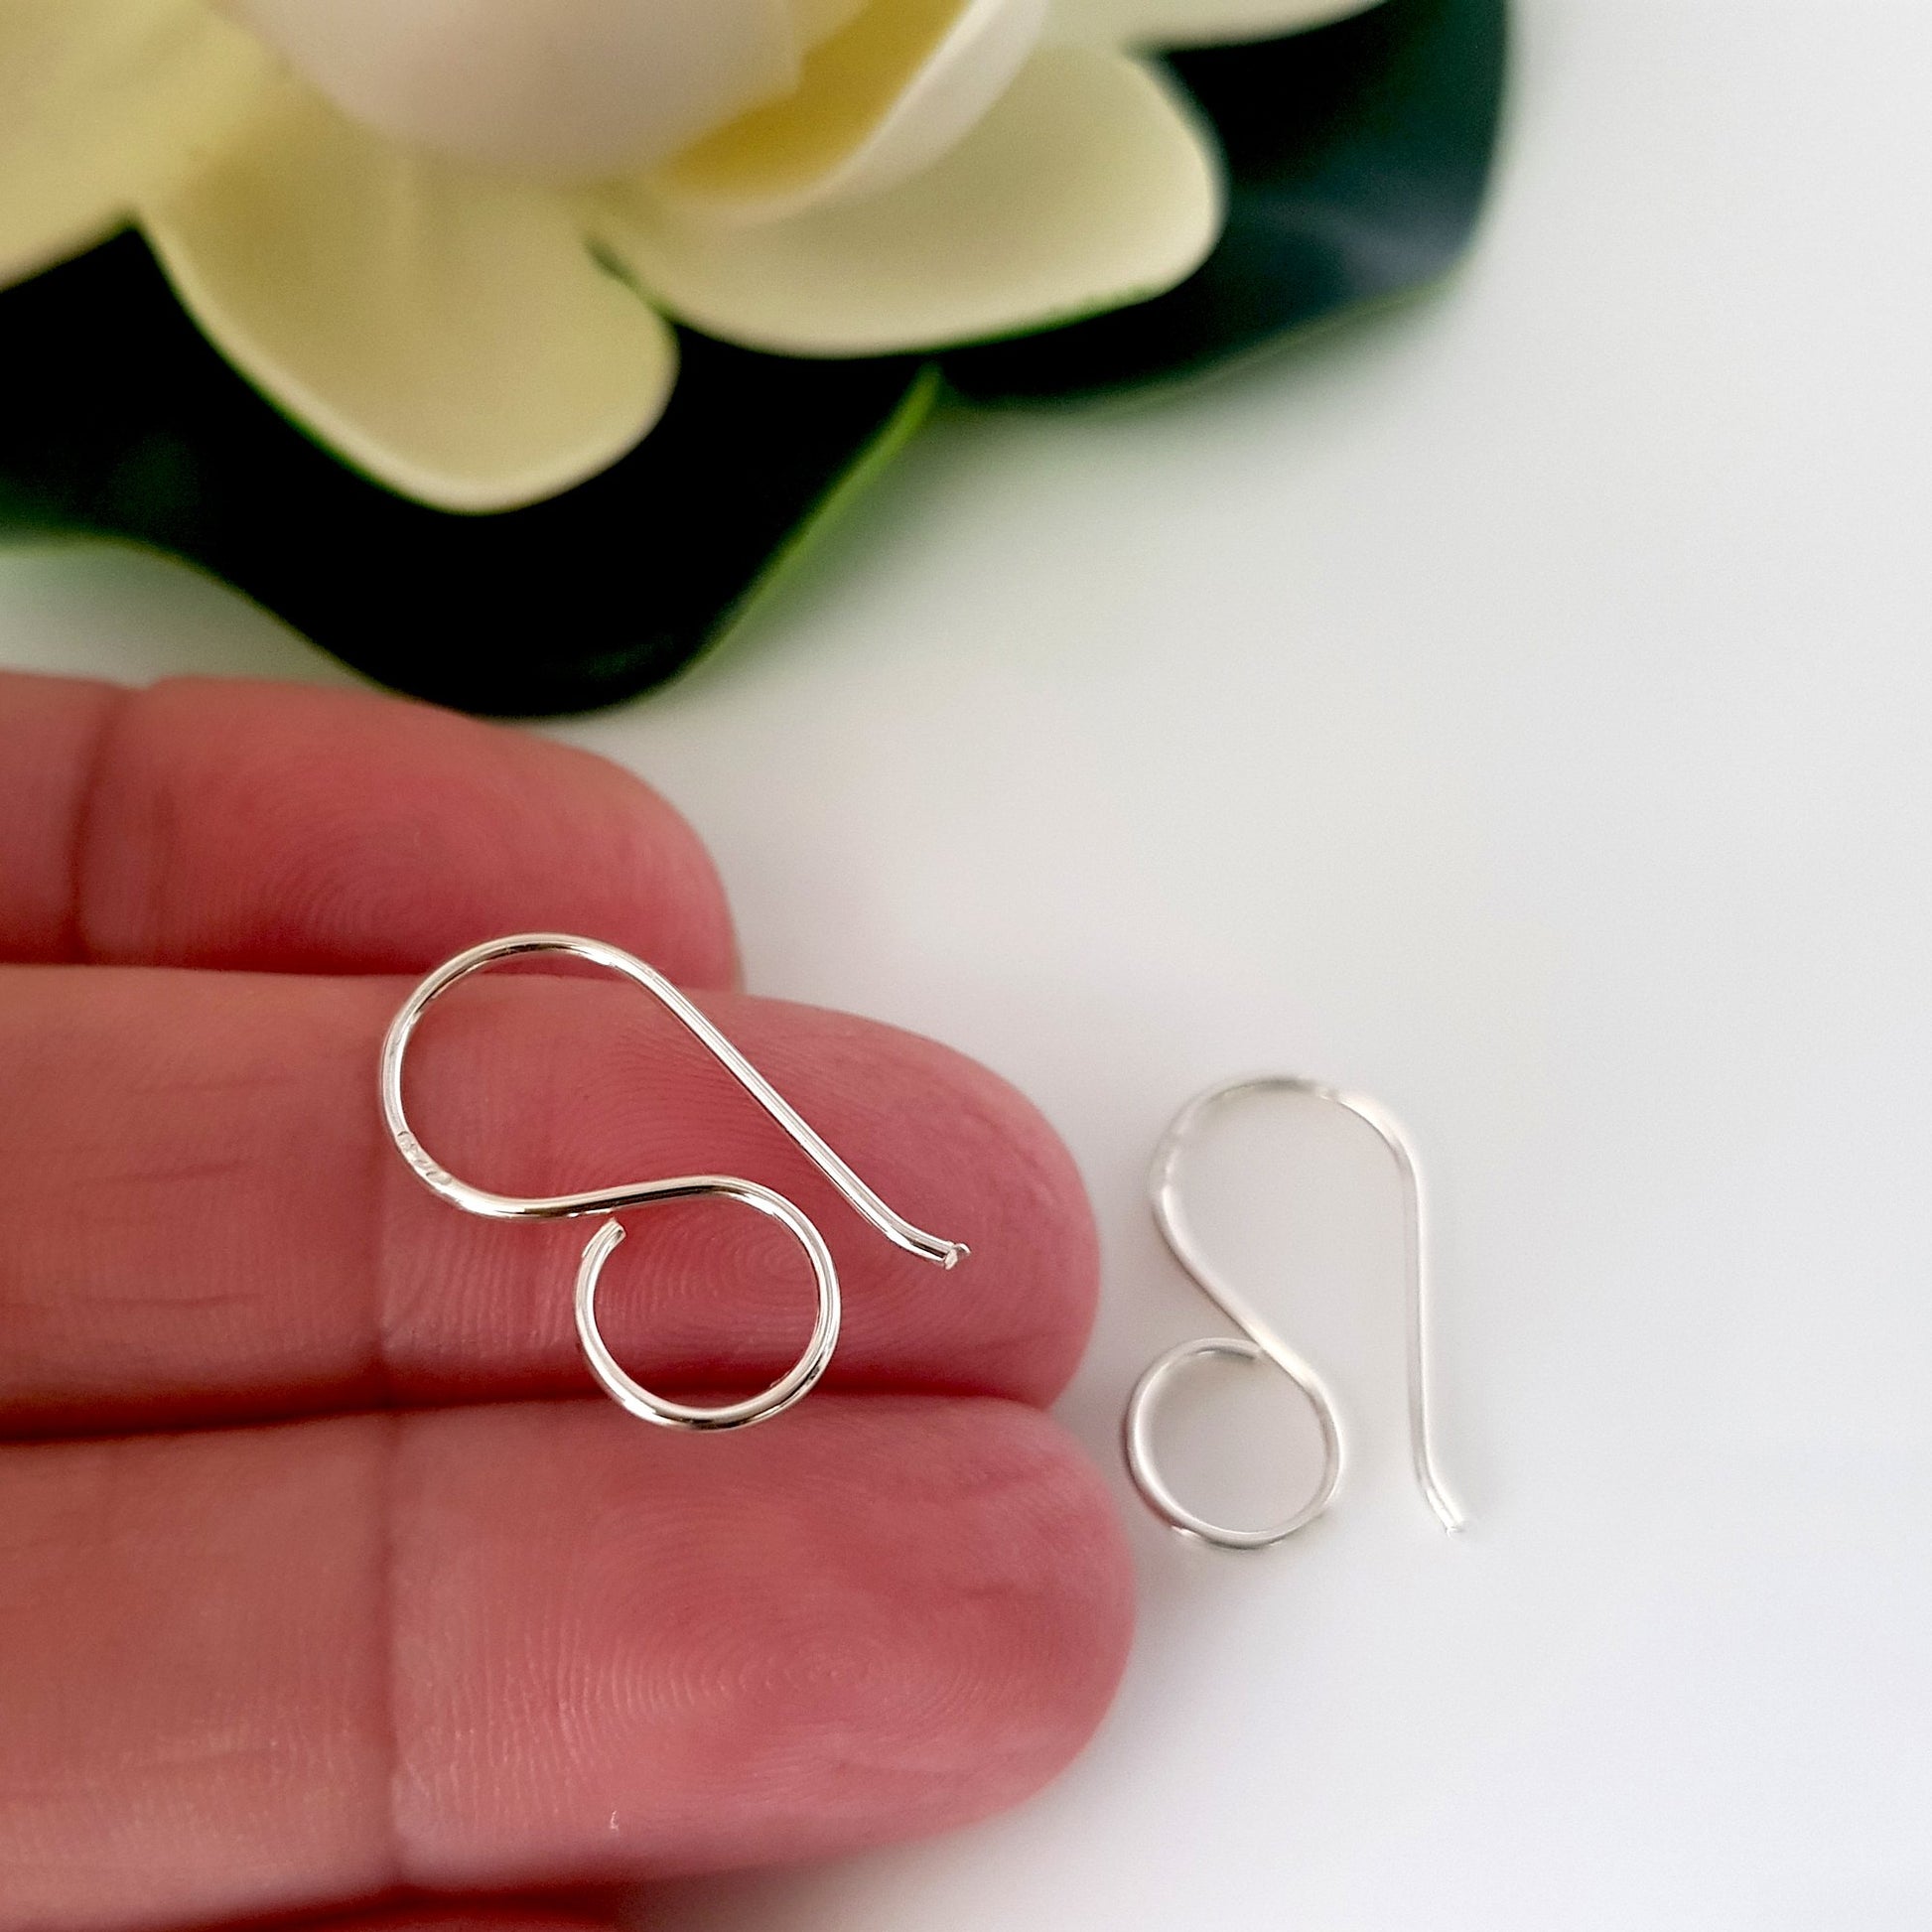 Earring Hooks Premium Quality French Hooks Large Loop For Resin, Polymer & Wood Earrings | SS-026EH | Earring Supply - Kalitheo 